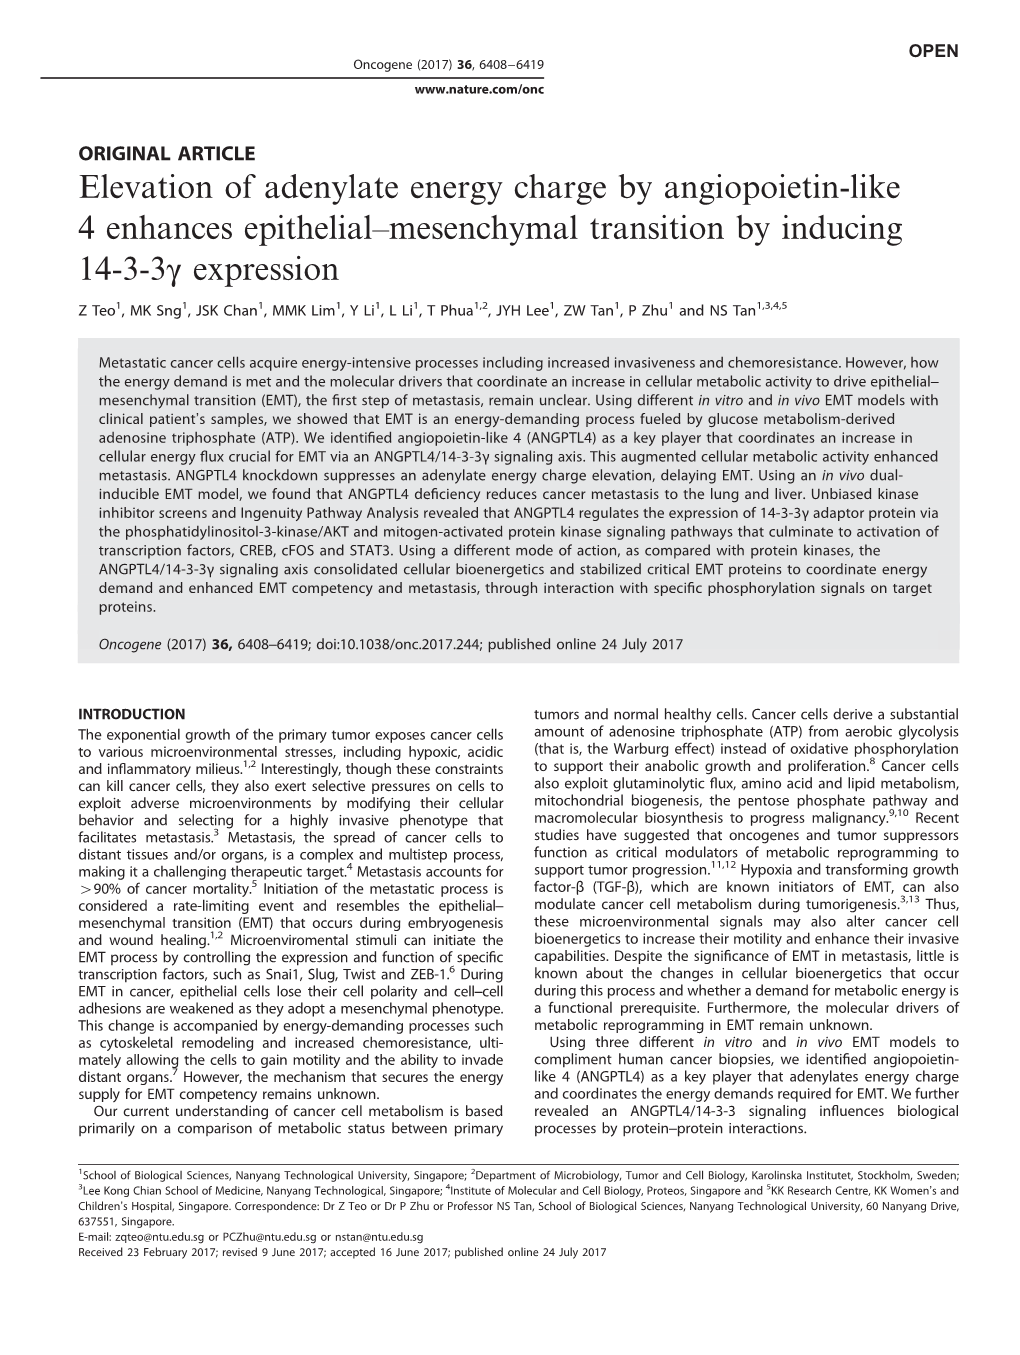 Elevation of Adenylate Energy Charge by Angiopoietin-Like 4 Enhances Epithelial–Mesenchymal Transition by Inducing 14-3-3Γ Expression